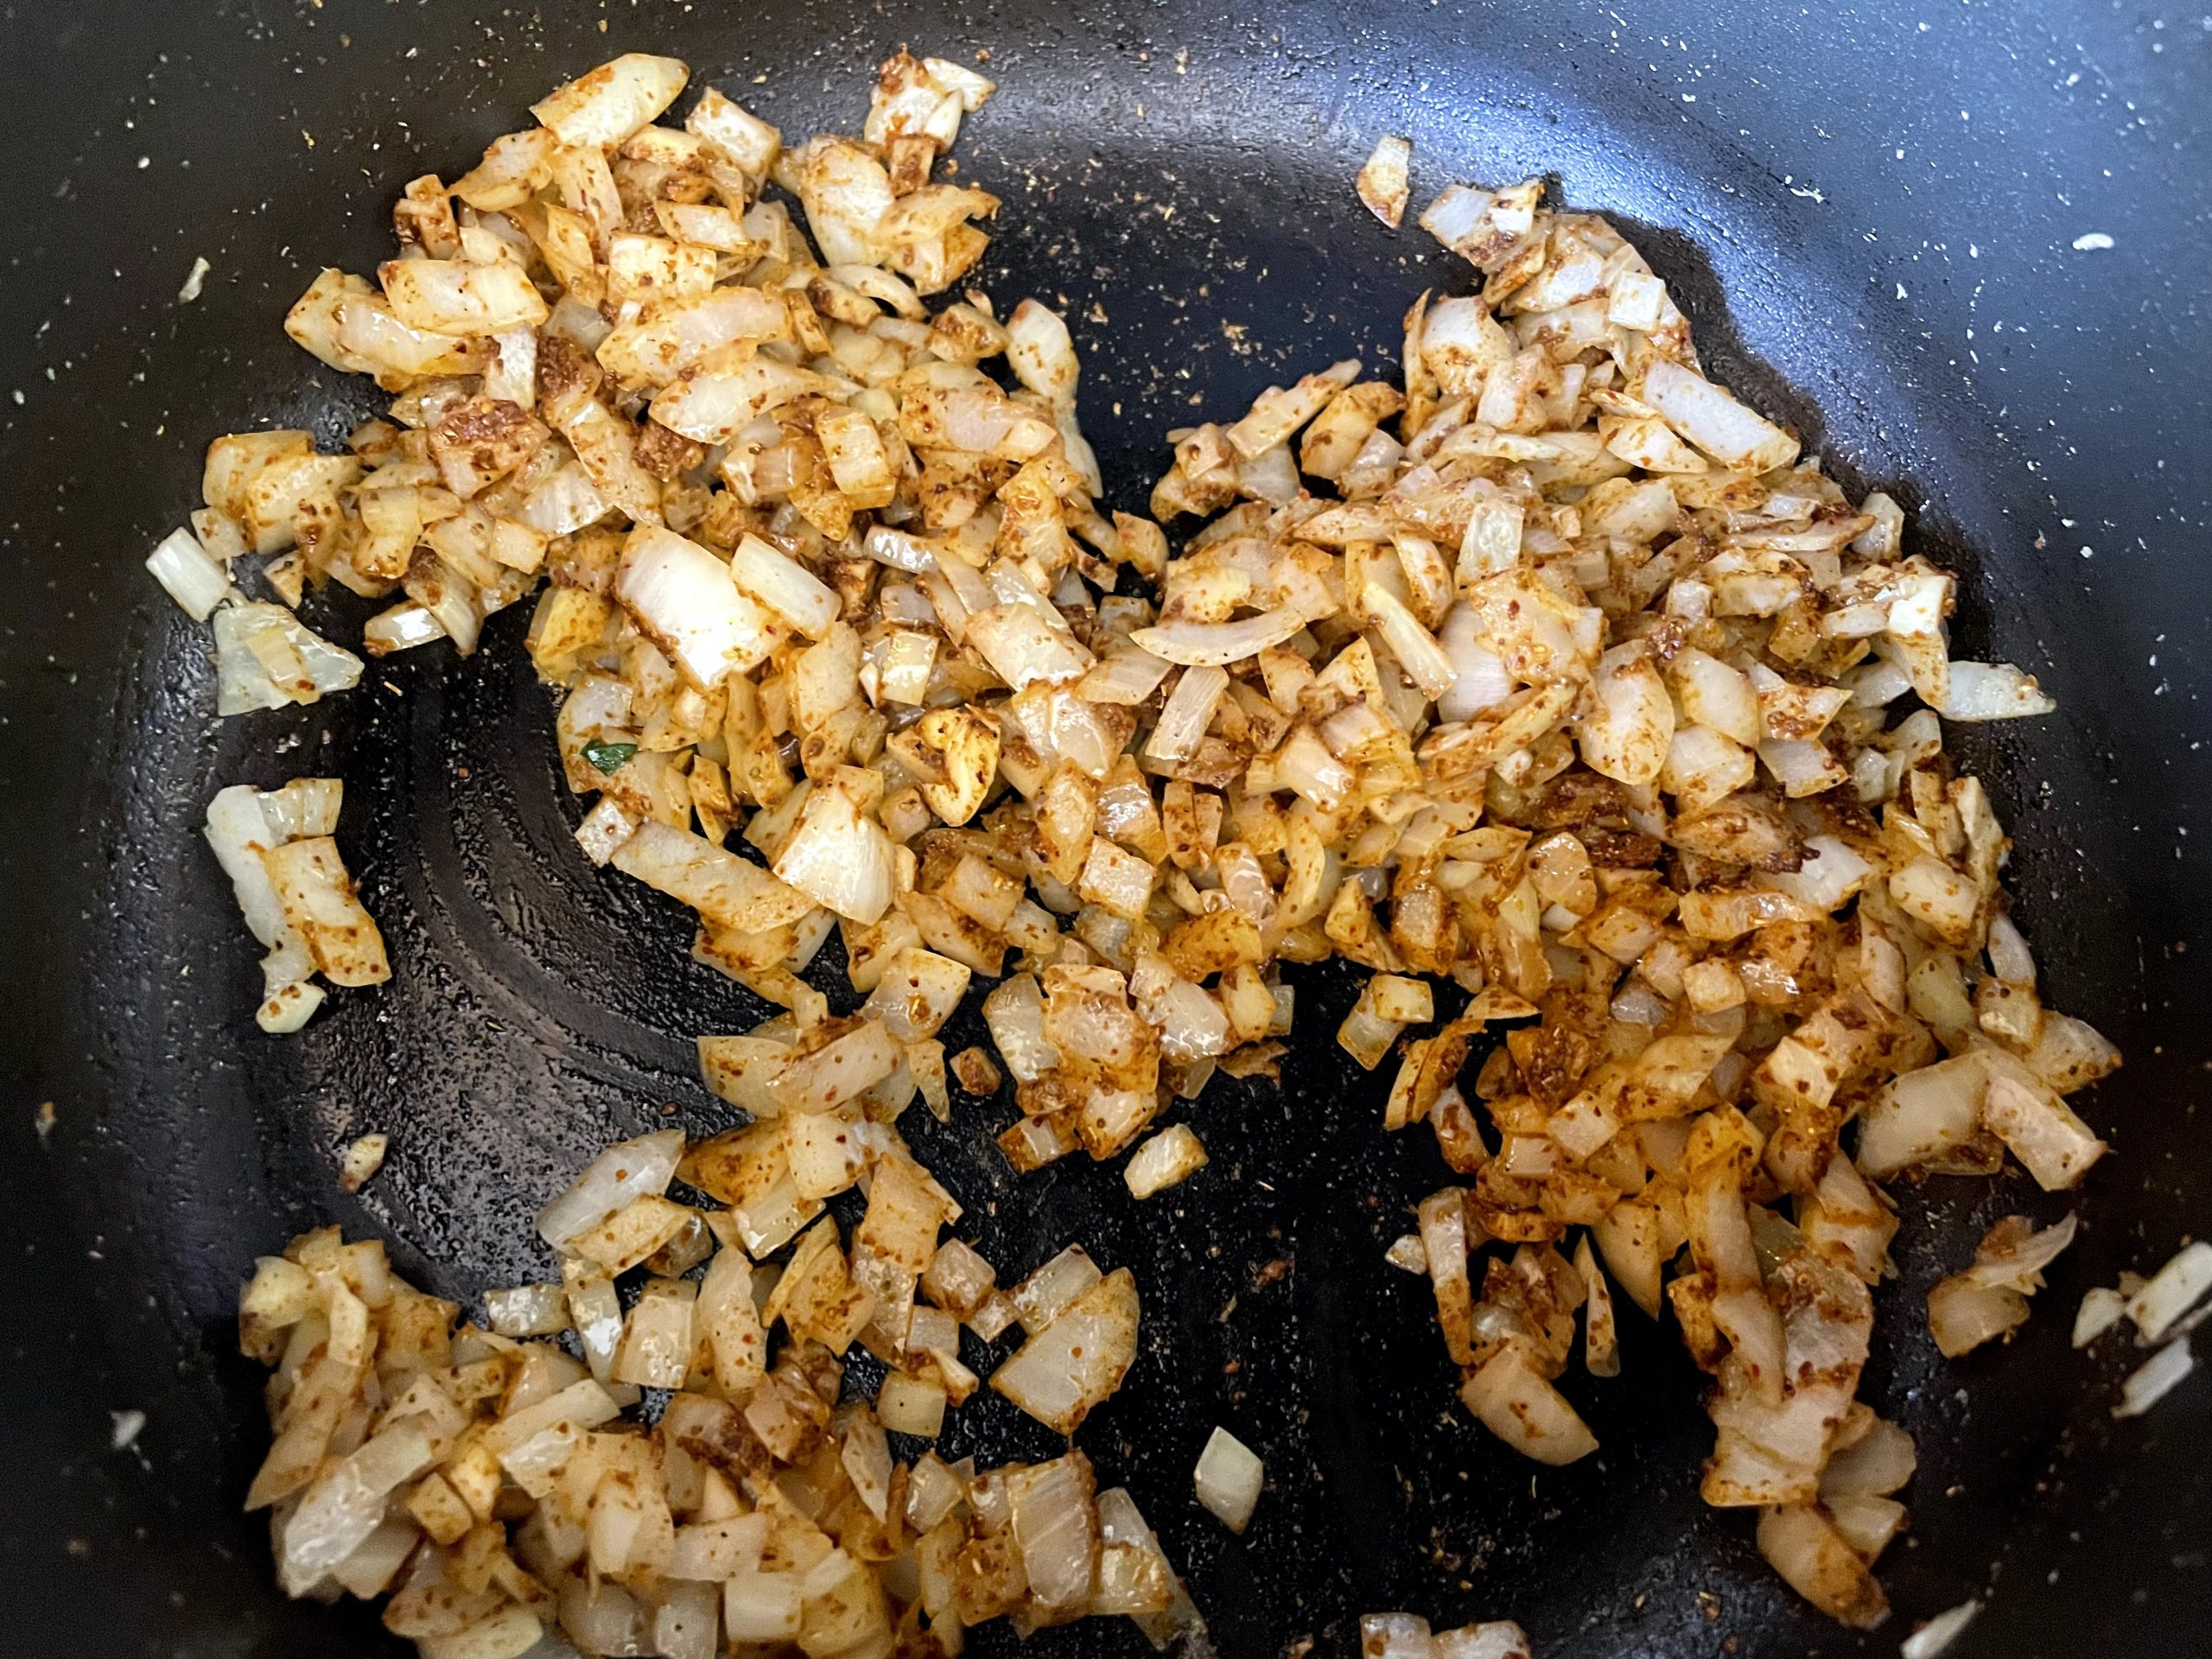 Caramelized onions and garlic.